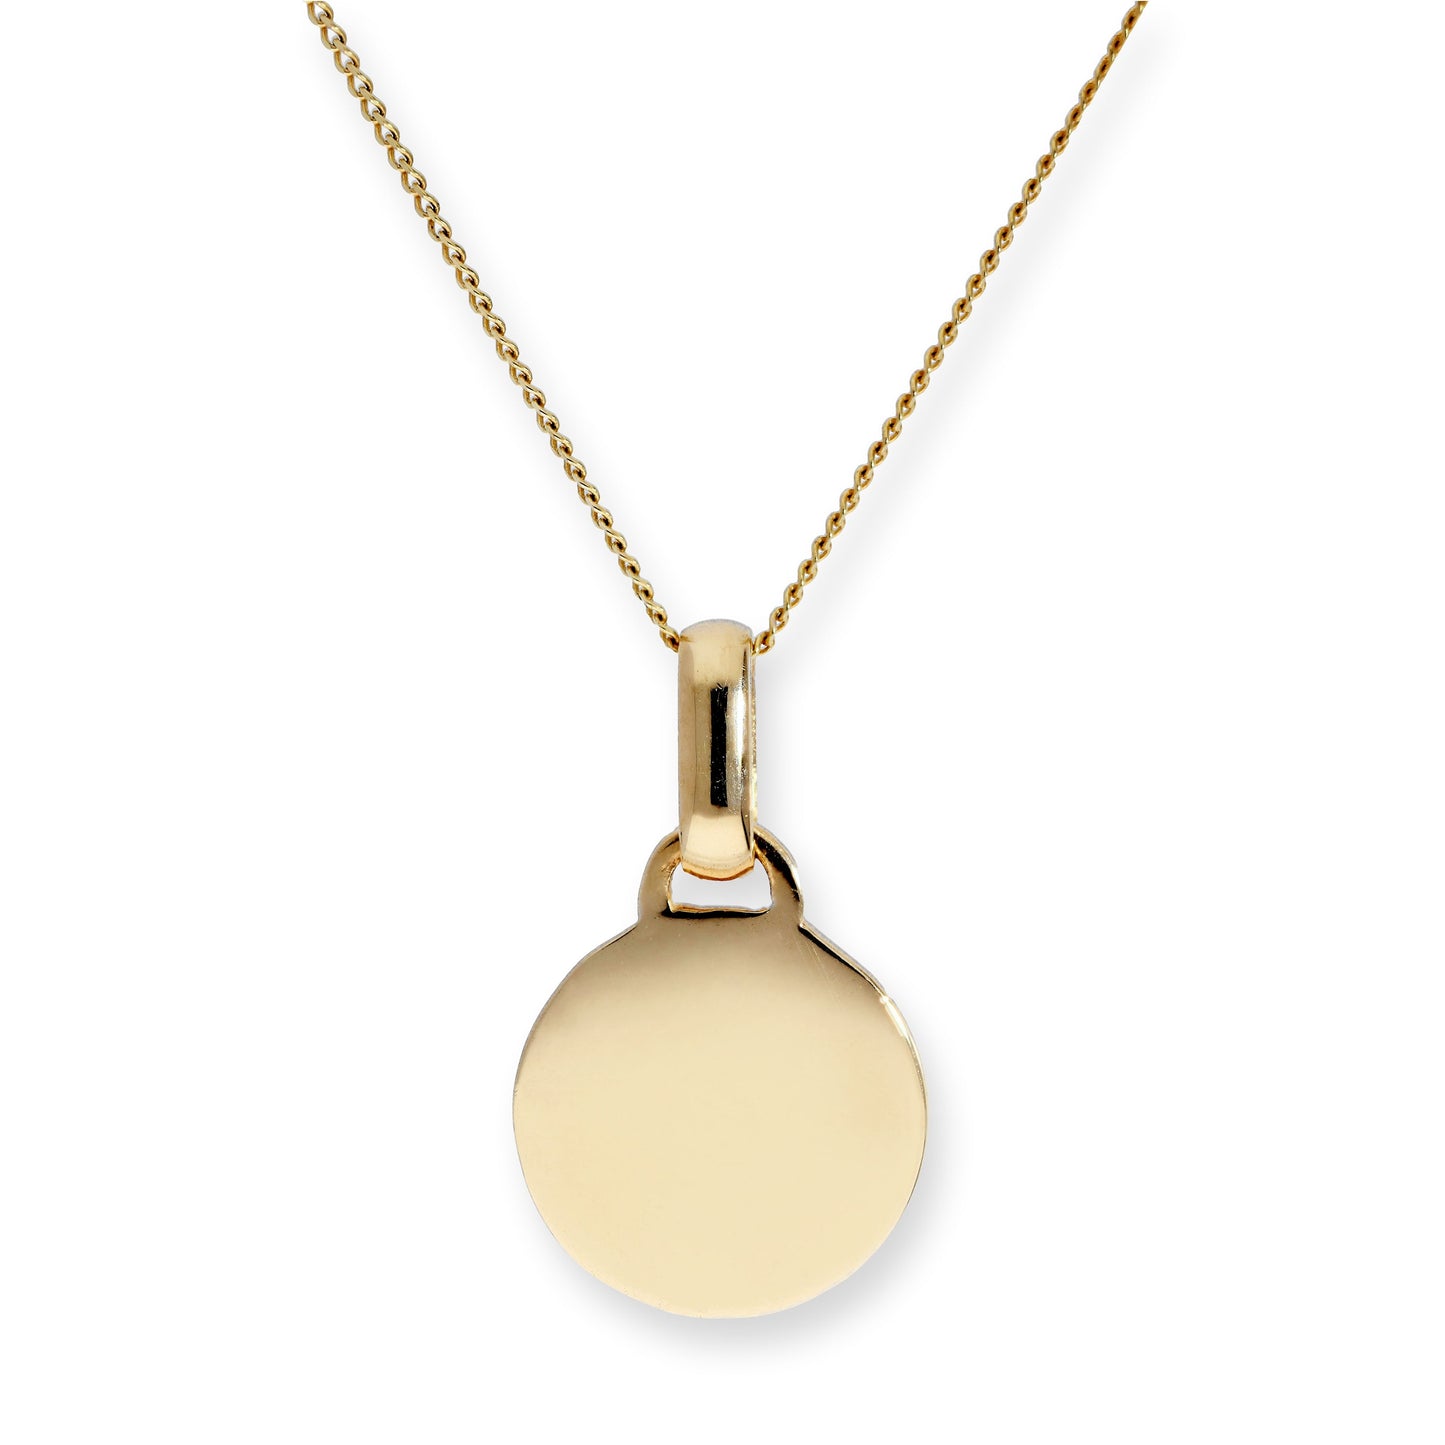 9ct Gold Engravable Round Pendant Necklace 16 - 20 Inches